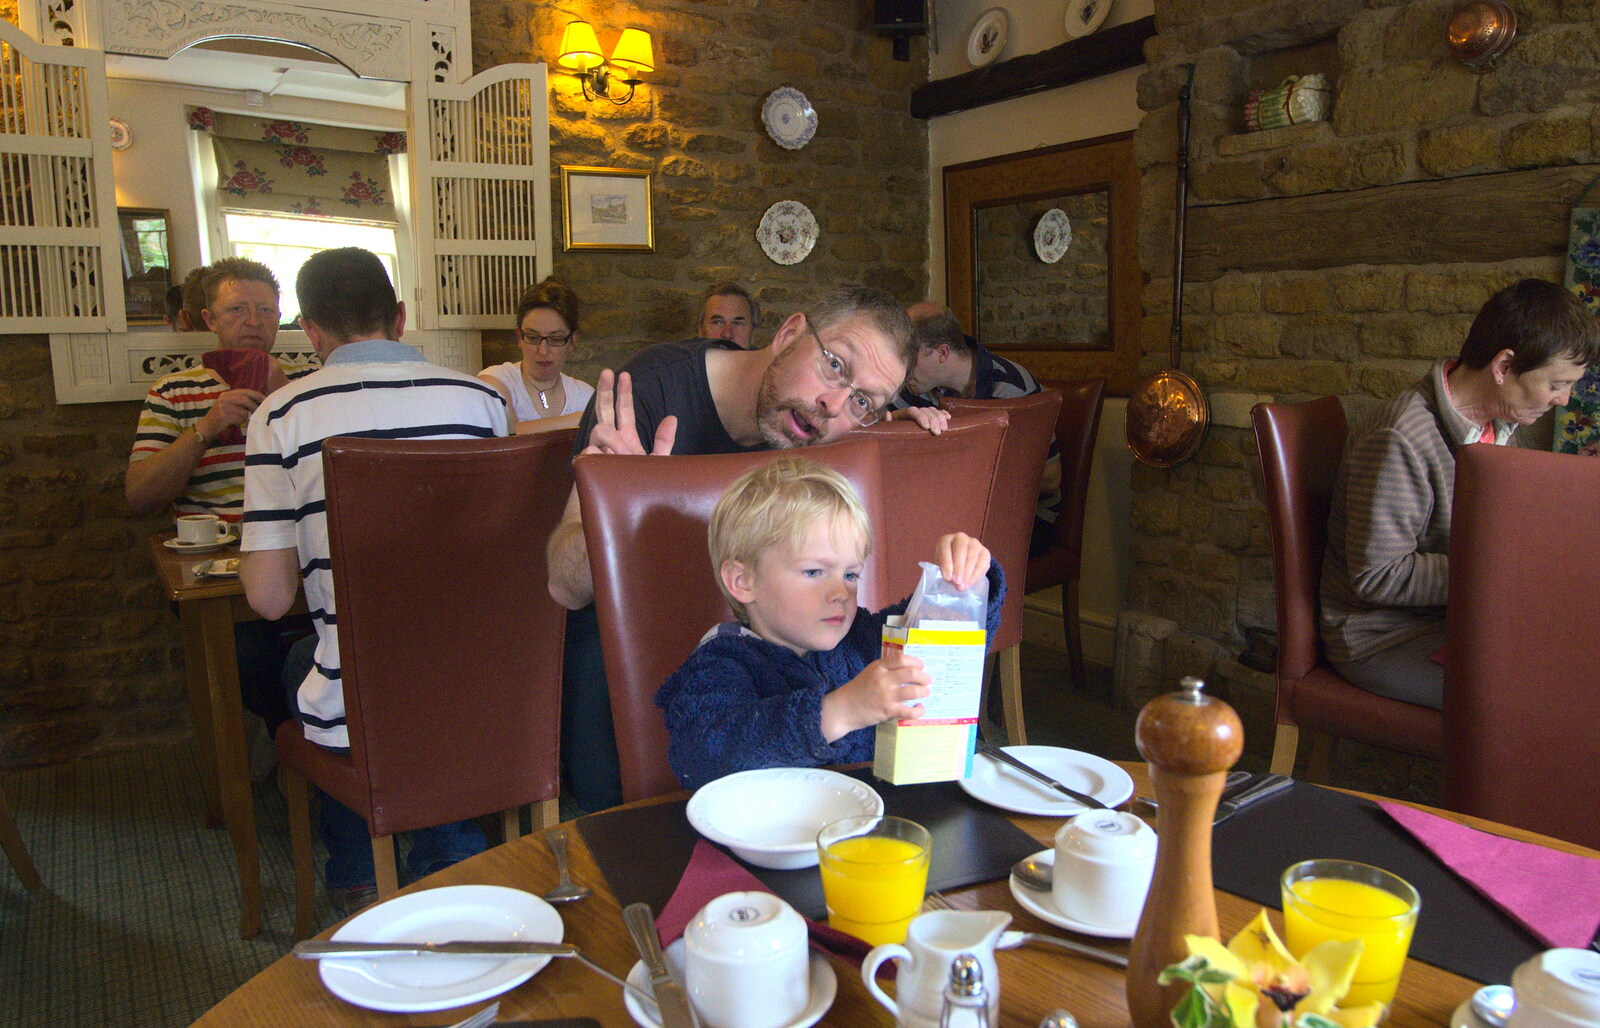 Marc photo-bombs Harry at breakfast from The BSCC Weekend Away, Lyddington, Rutland - 9th May 2015